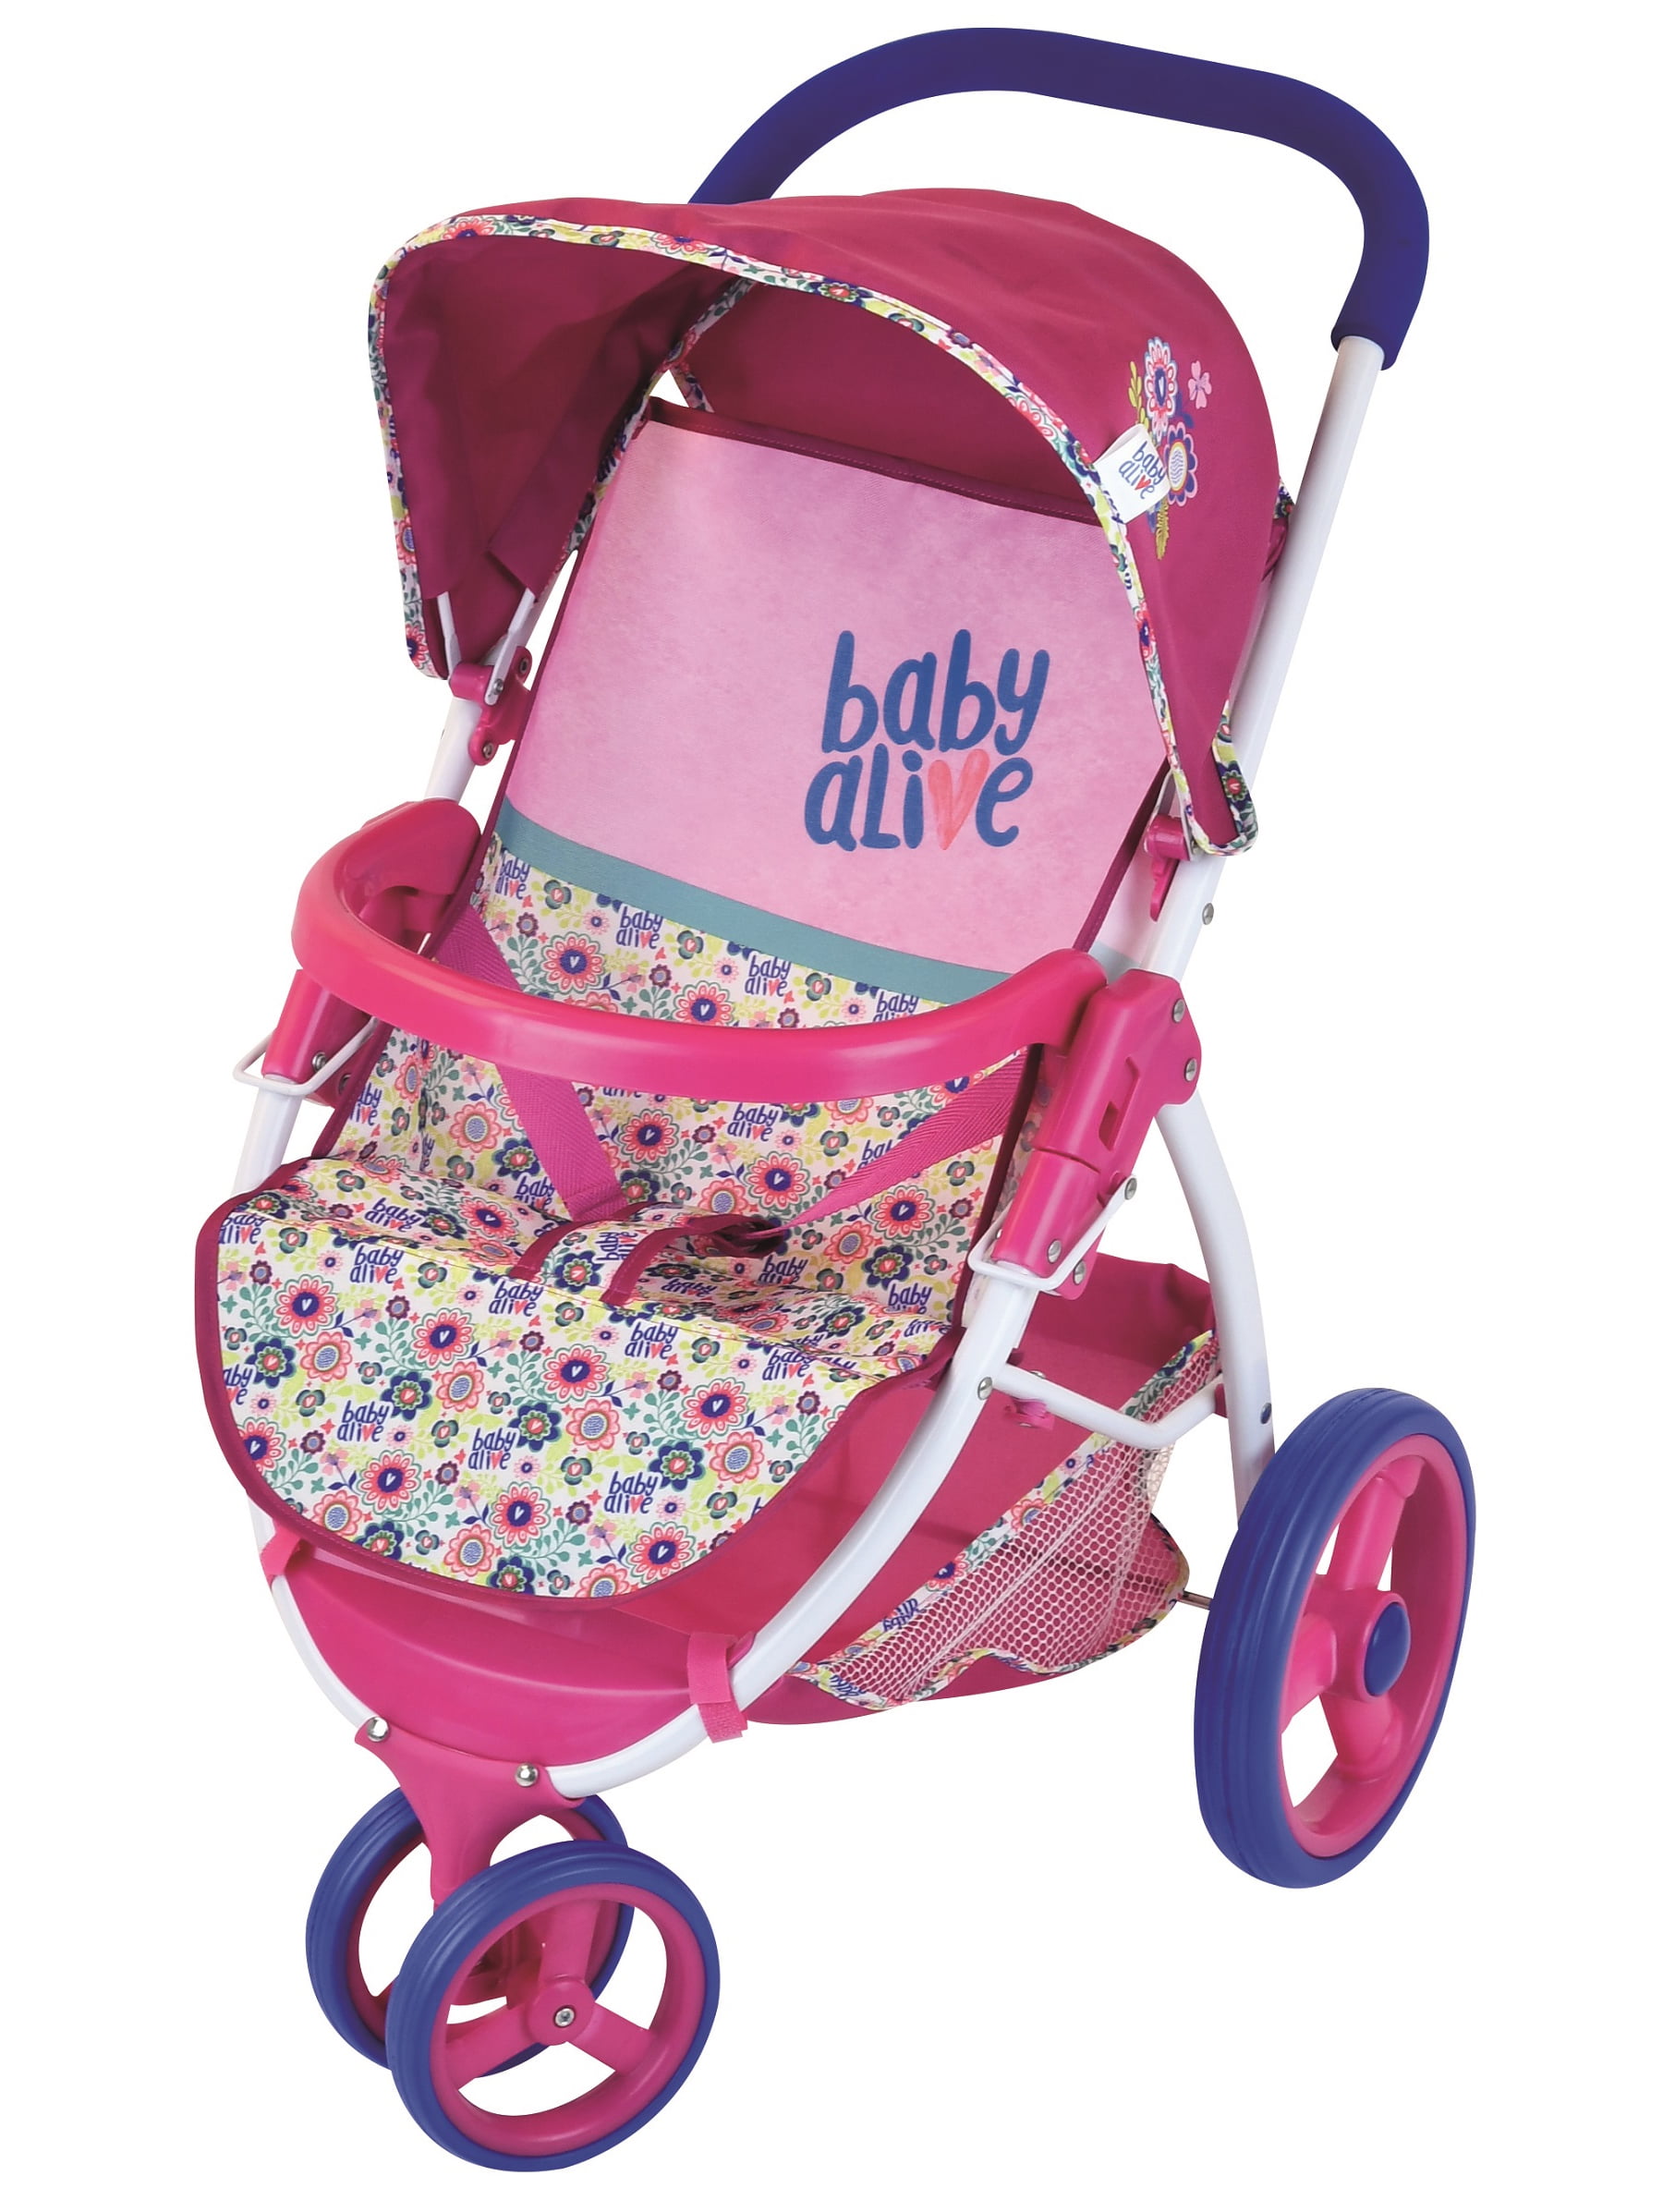 Precious Toys Pink Pink Handles White Polka Dots Doll Stroller Silver Frame 